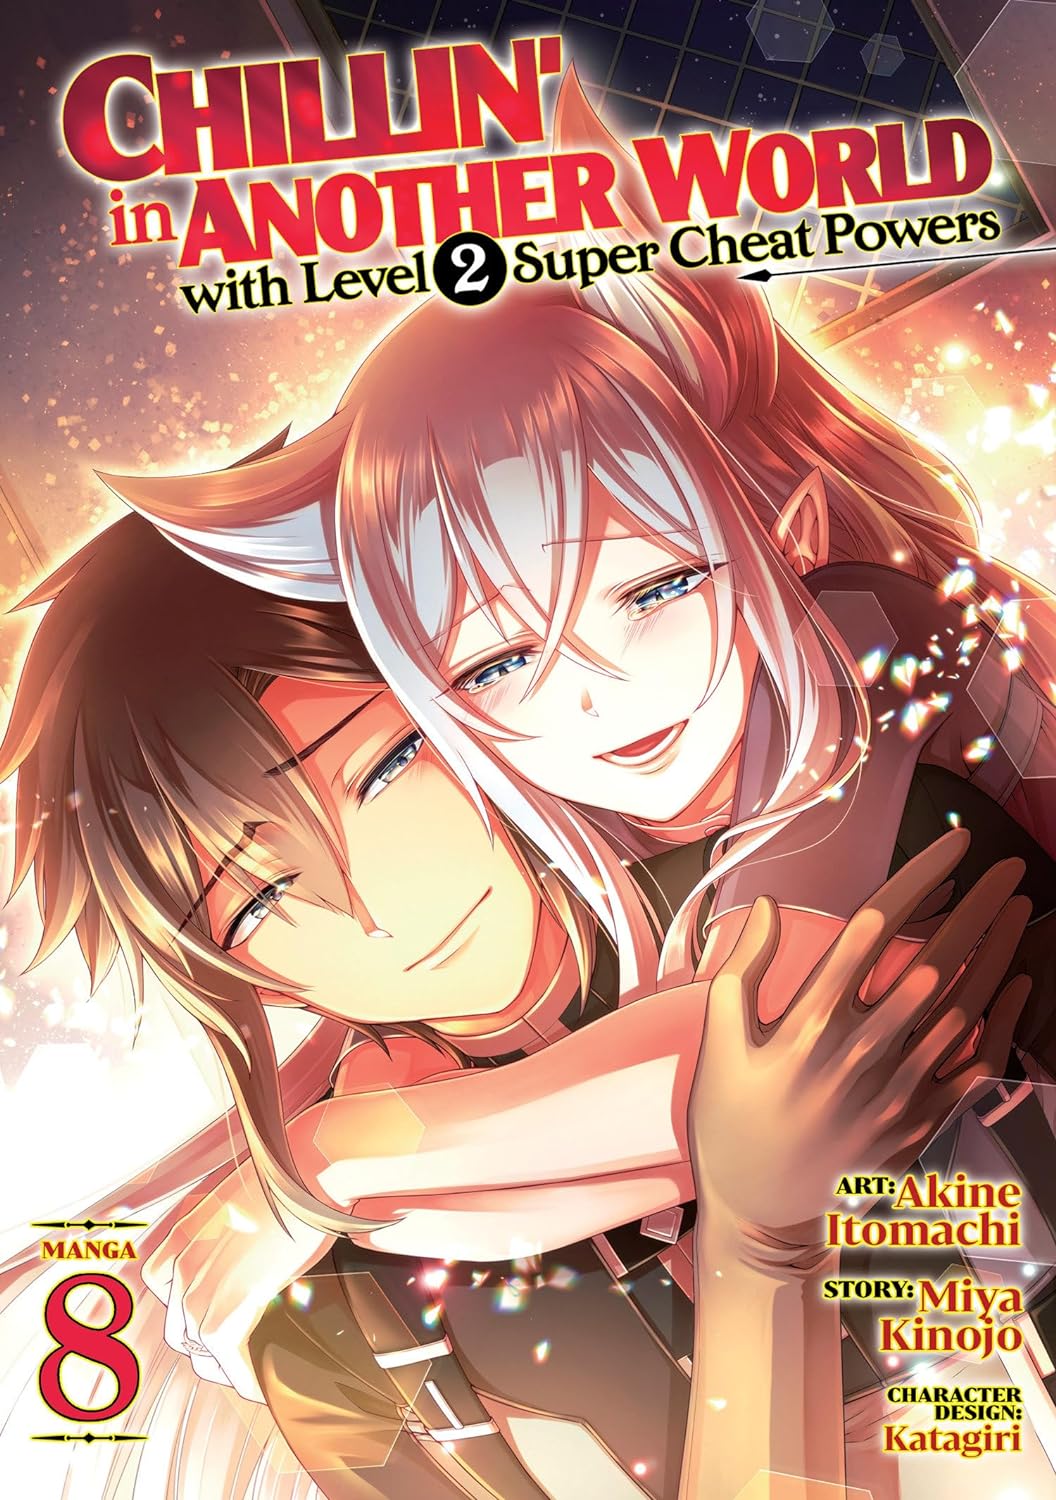 (14/05/2024) Chillin’ in Another World with Level 2 Super Cheat Powers (Manga) Vol. 08